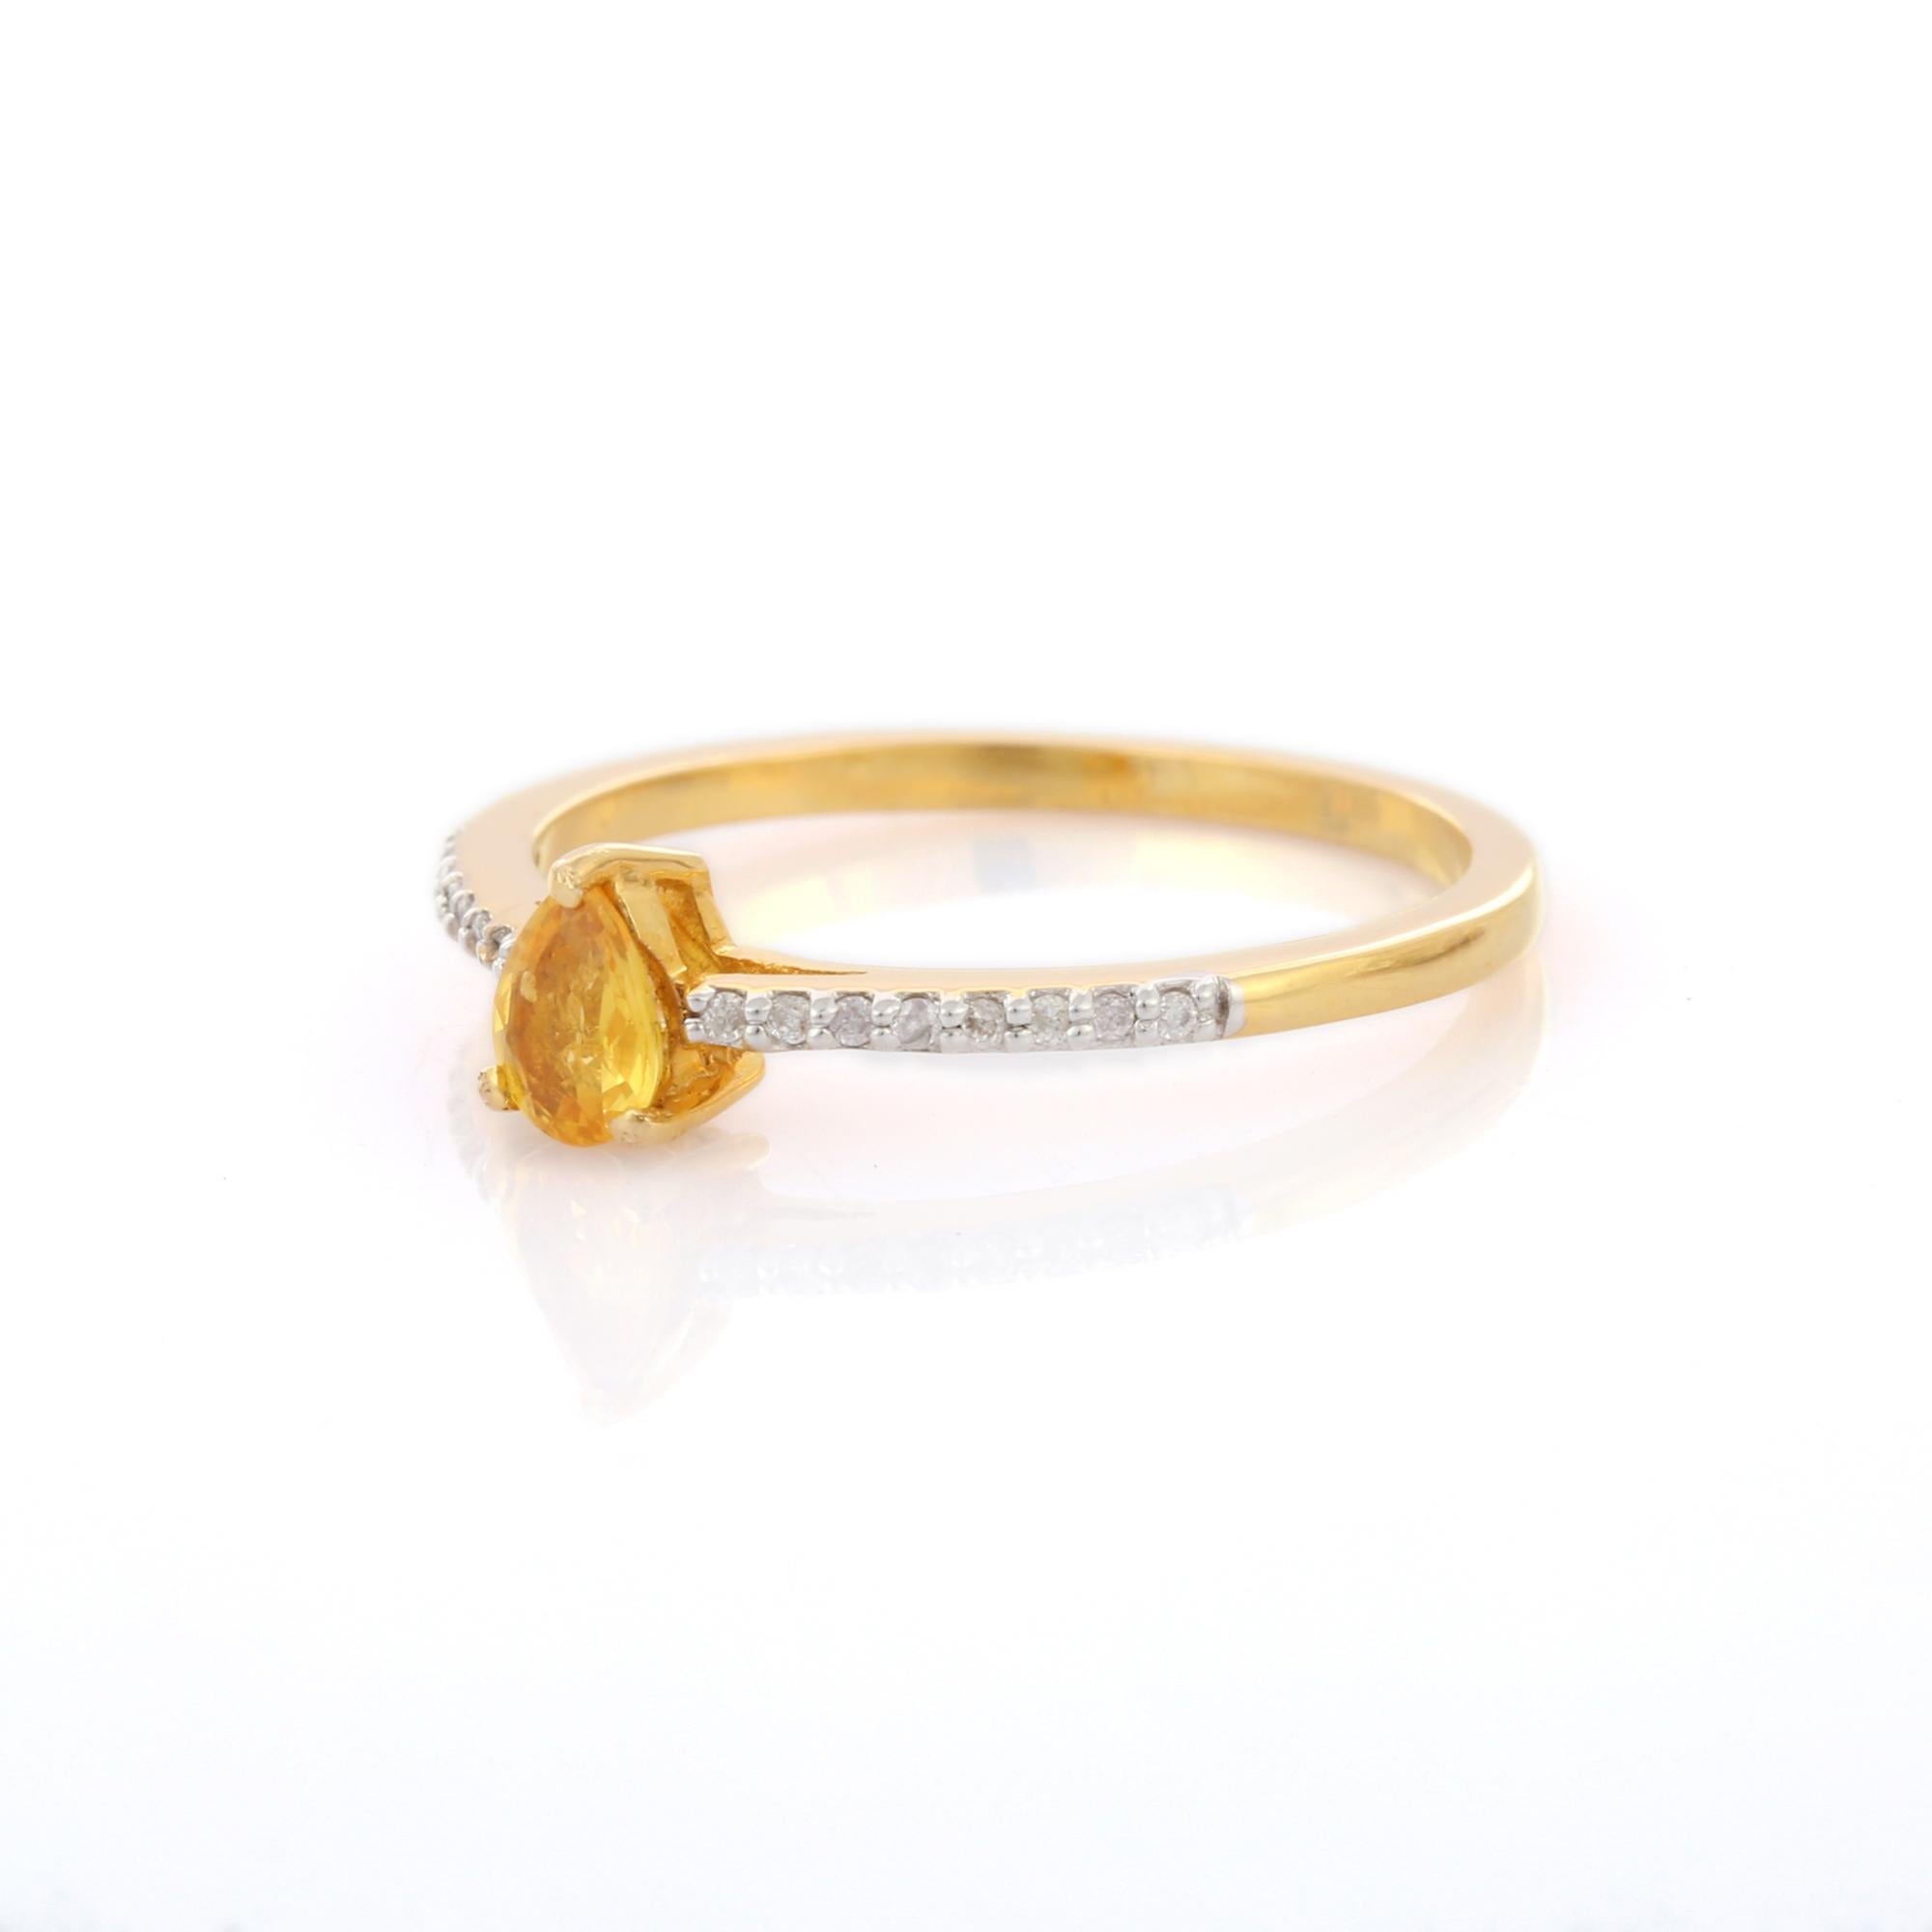 For Sale:  Pear Cut Yellow Sapphire and Diamond Statement Ring in 14K Yellow Gold   3